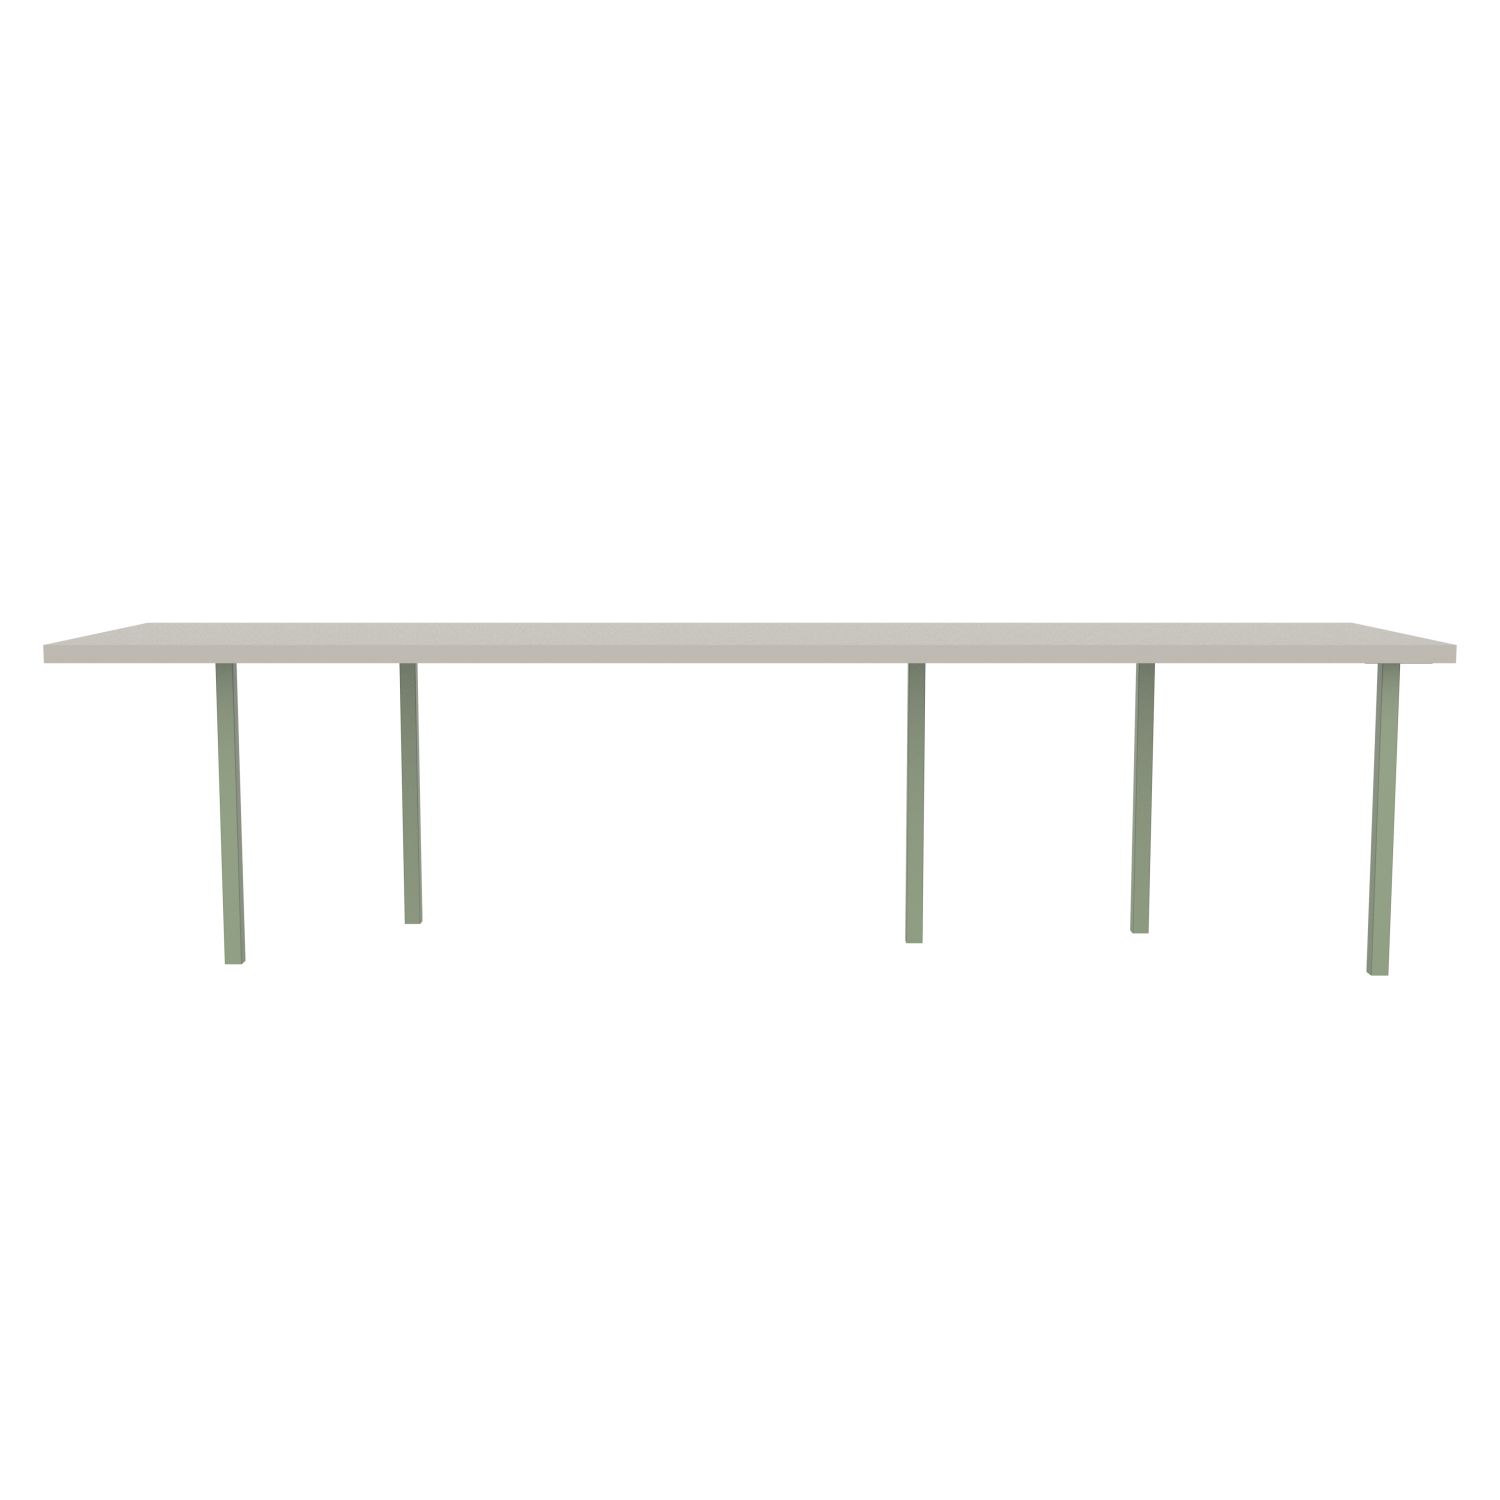 lensvelt bbrand table five fixed heigt 80x310 hpl white 50 mm price level 1 green ral6021